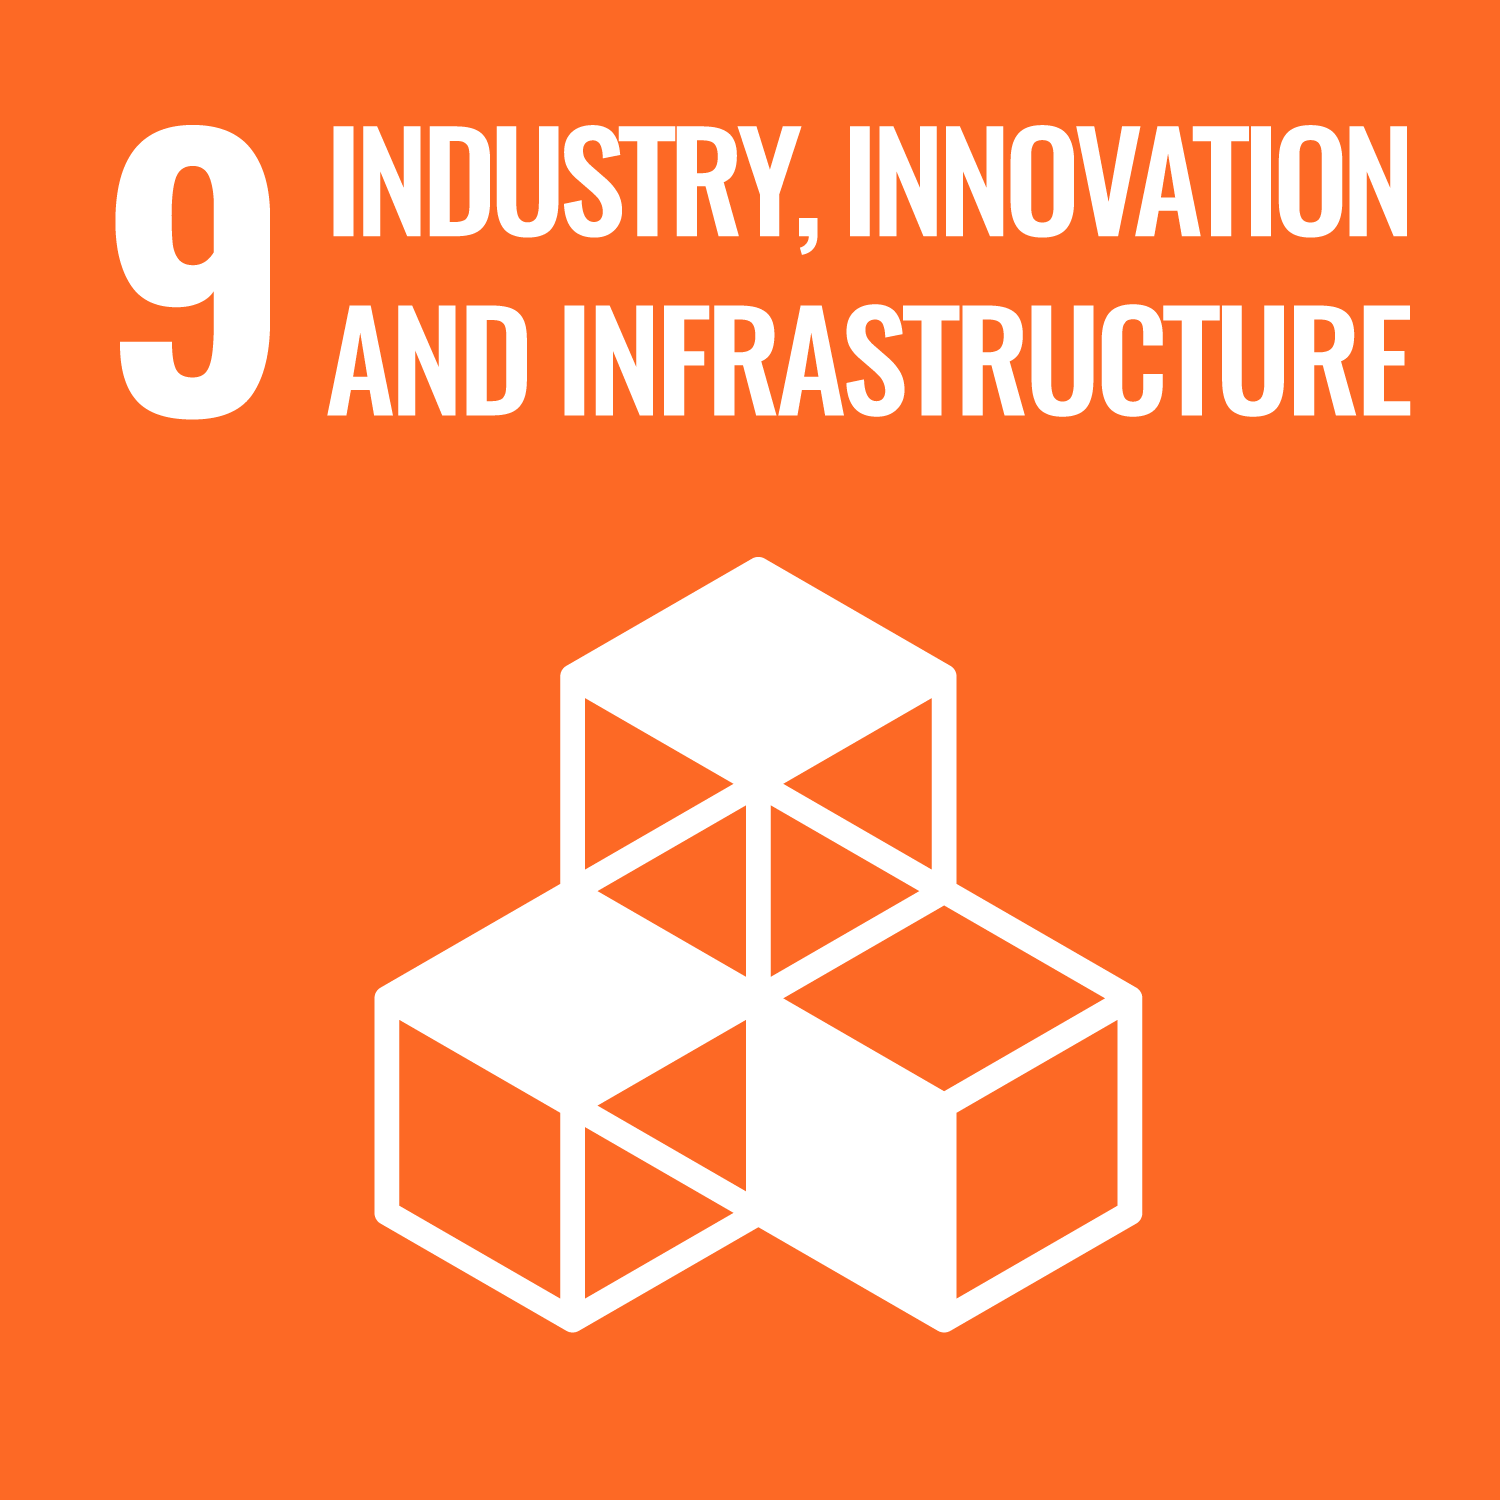 UNSDG 9 Industry innovation and infrastructure